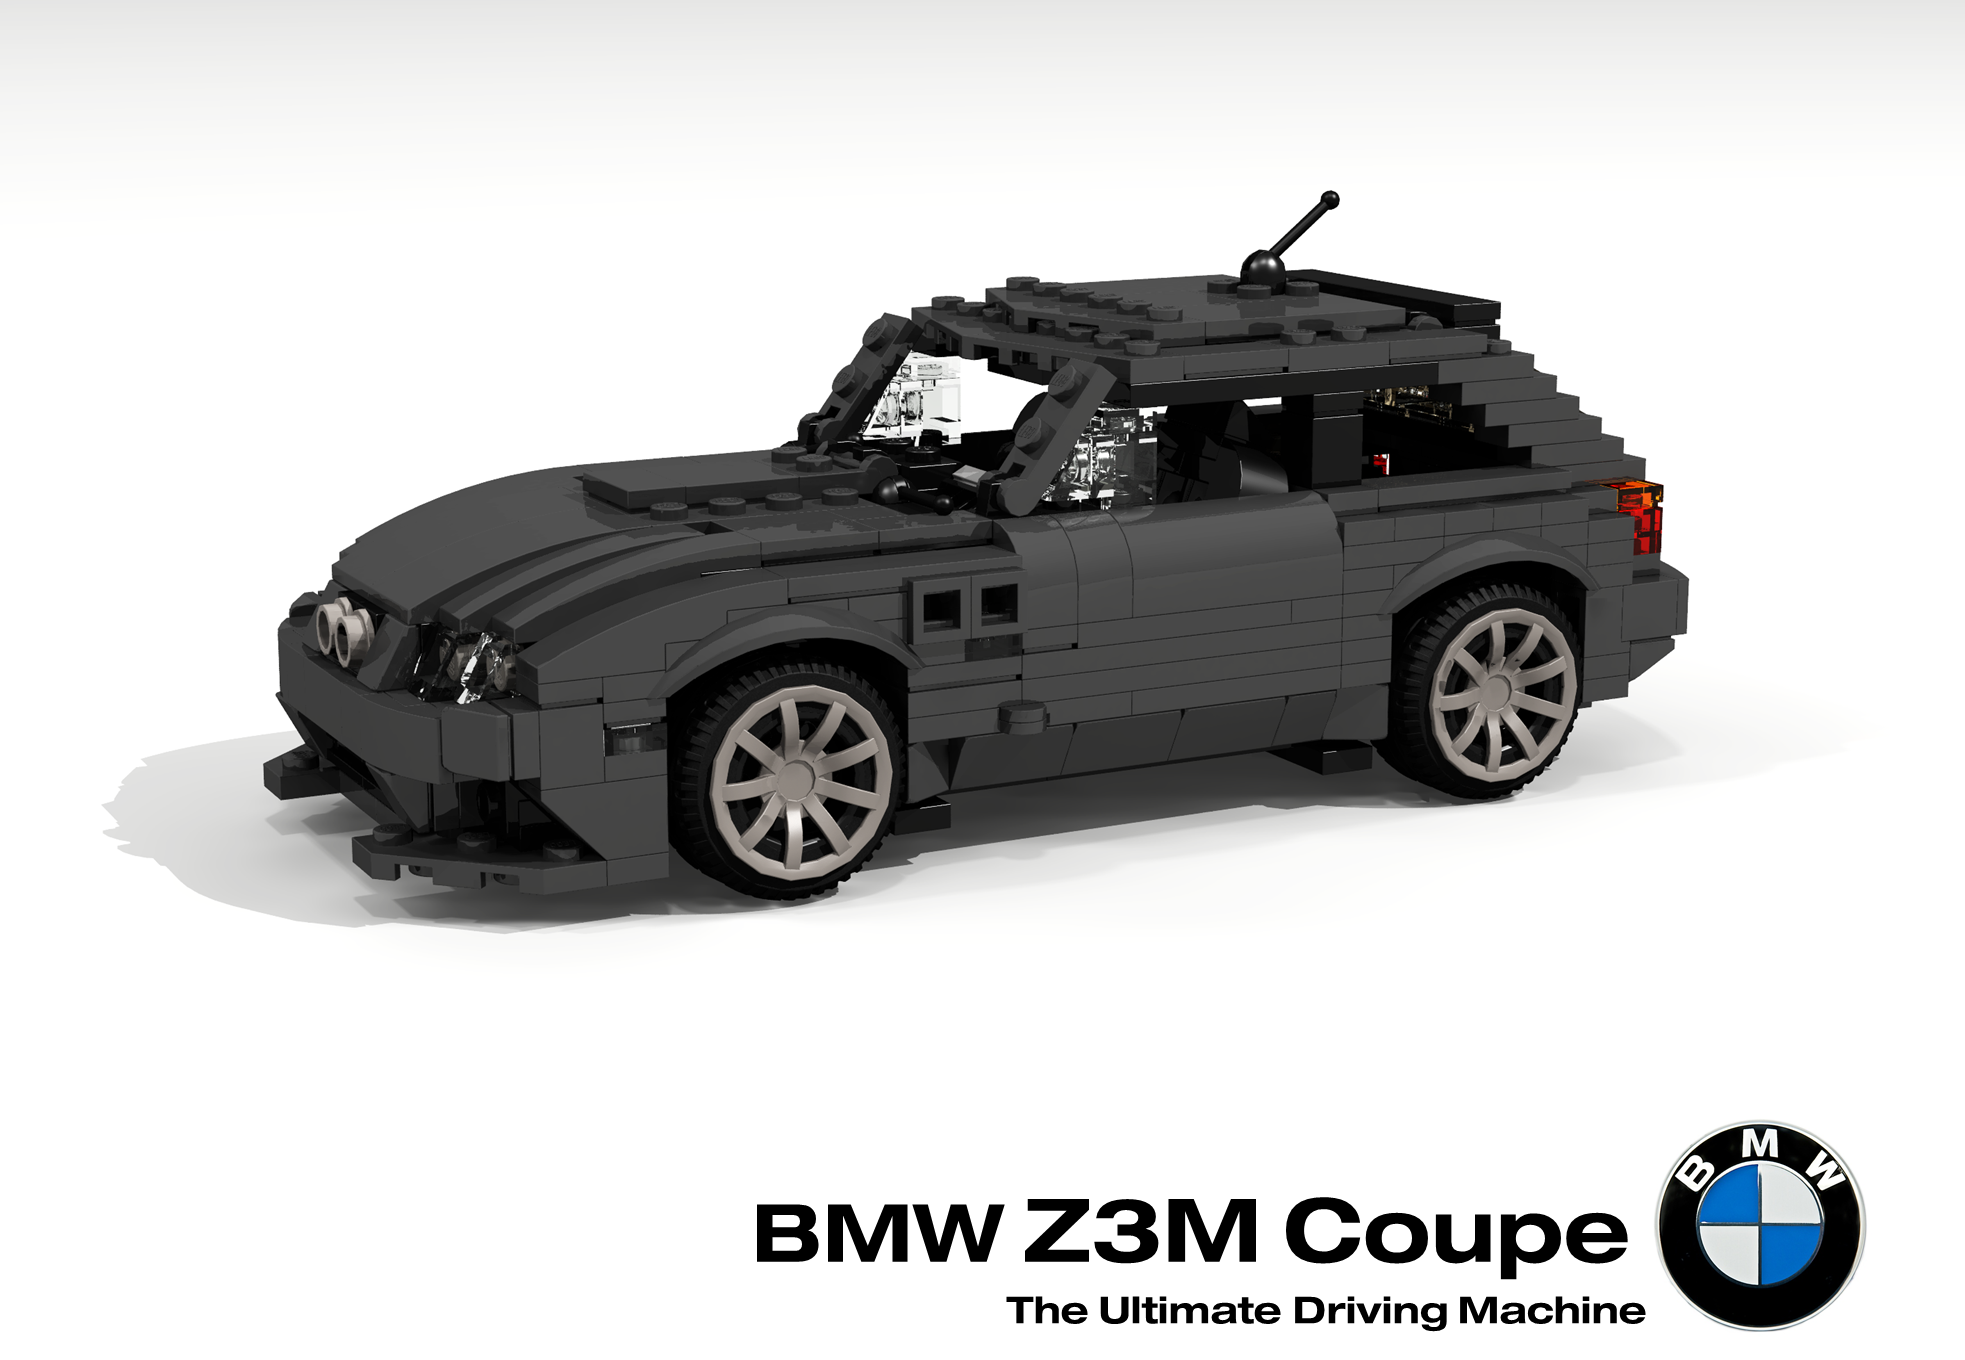 1999_bmw_z3m_coupe.png